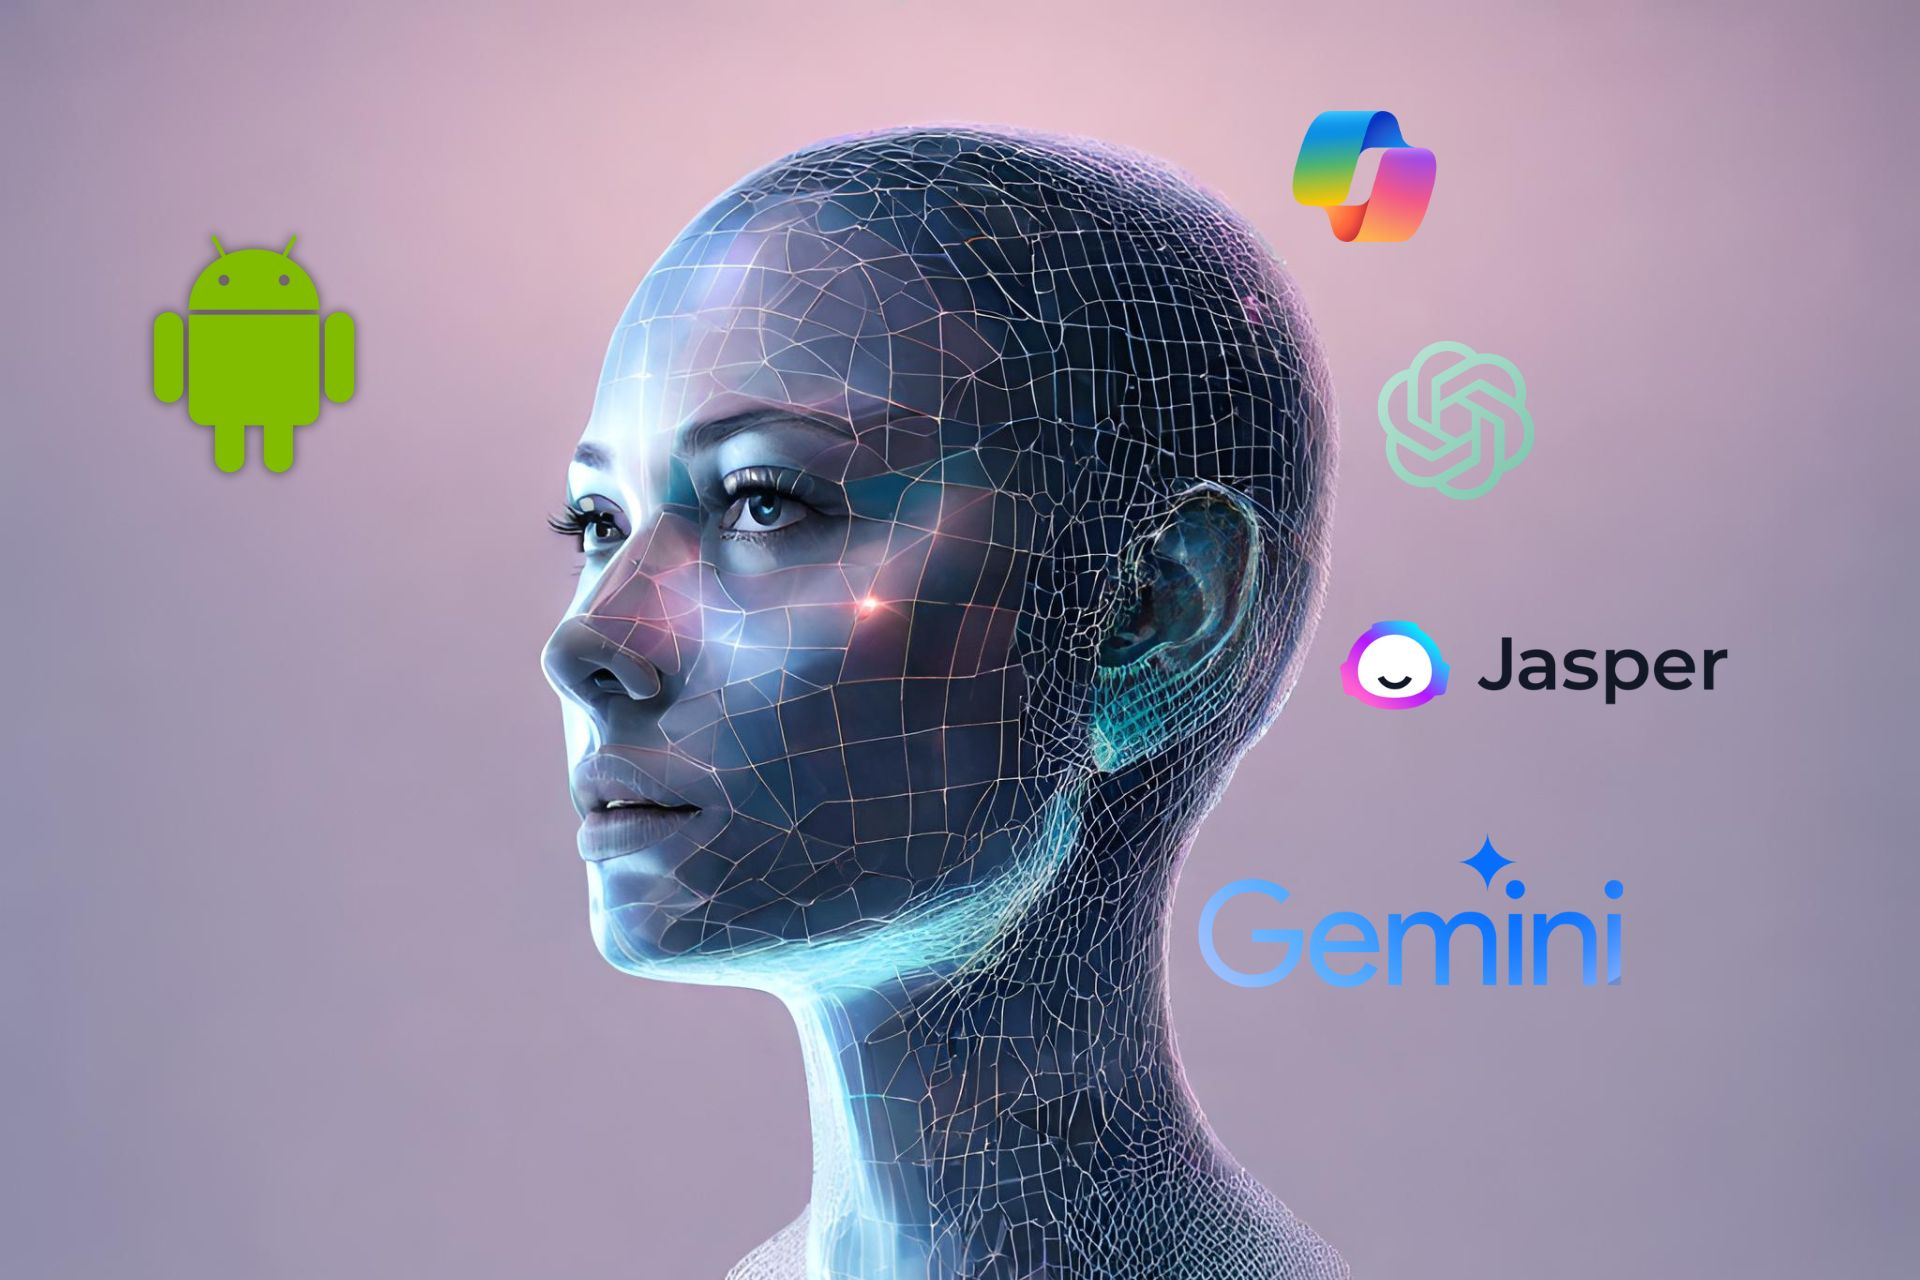 Chatbot logos behind an AI face who watches the Android Logo